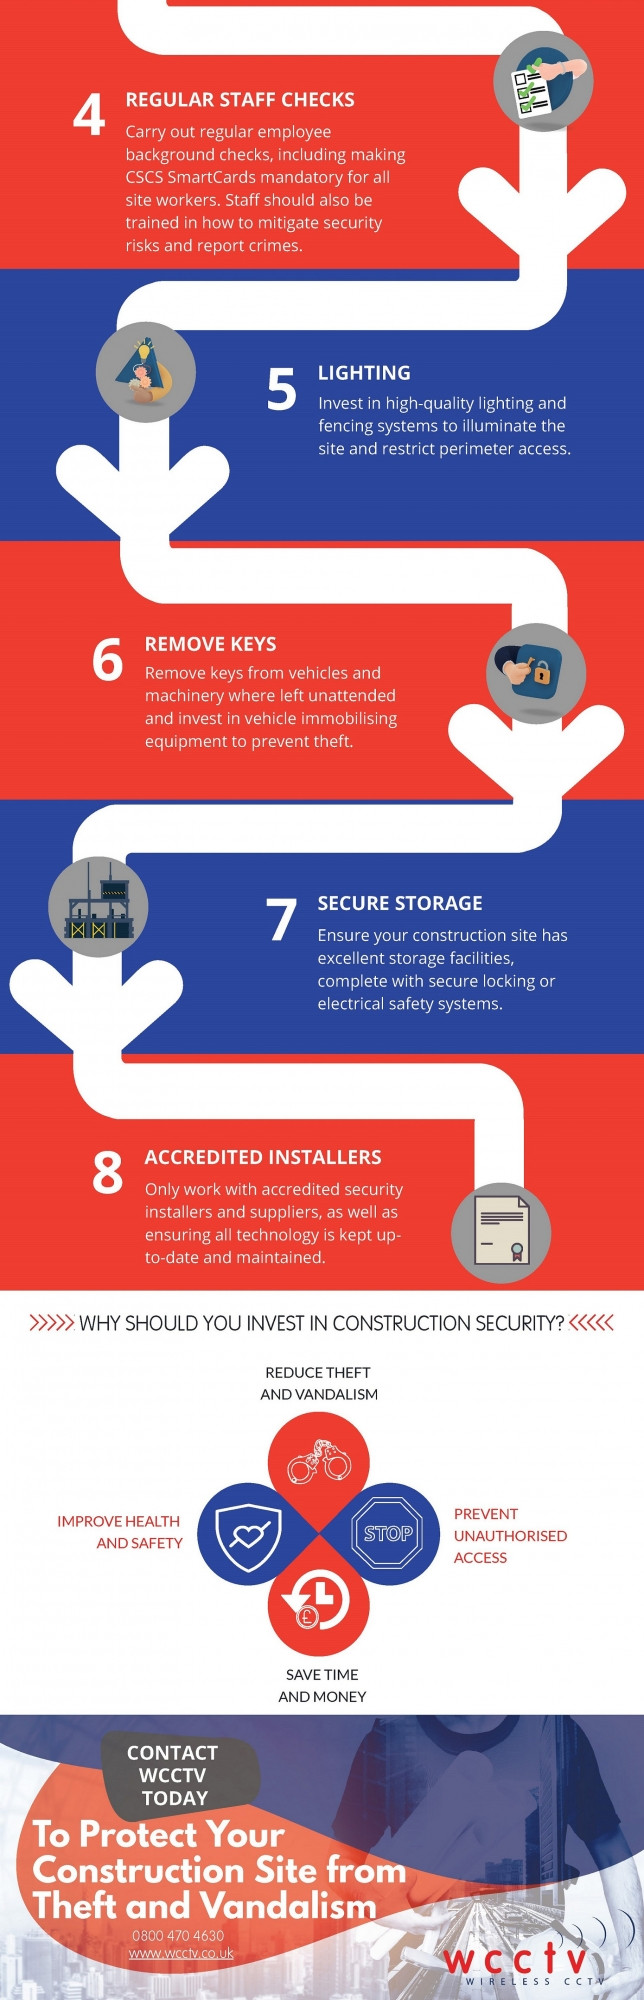 How to Secure your Construction Site - Infographic 2